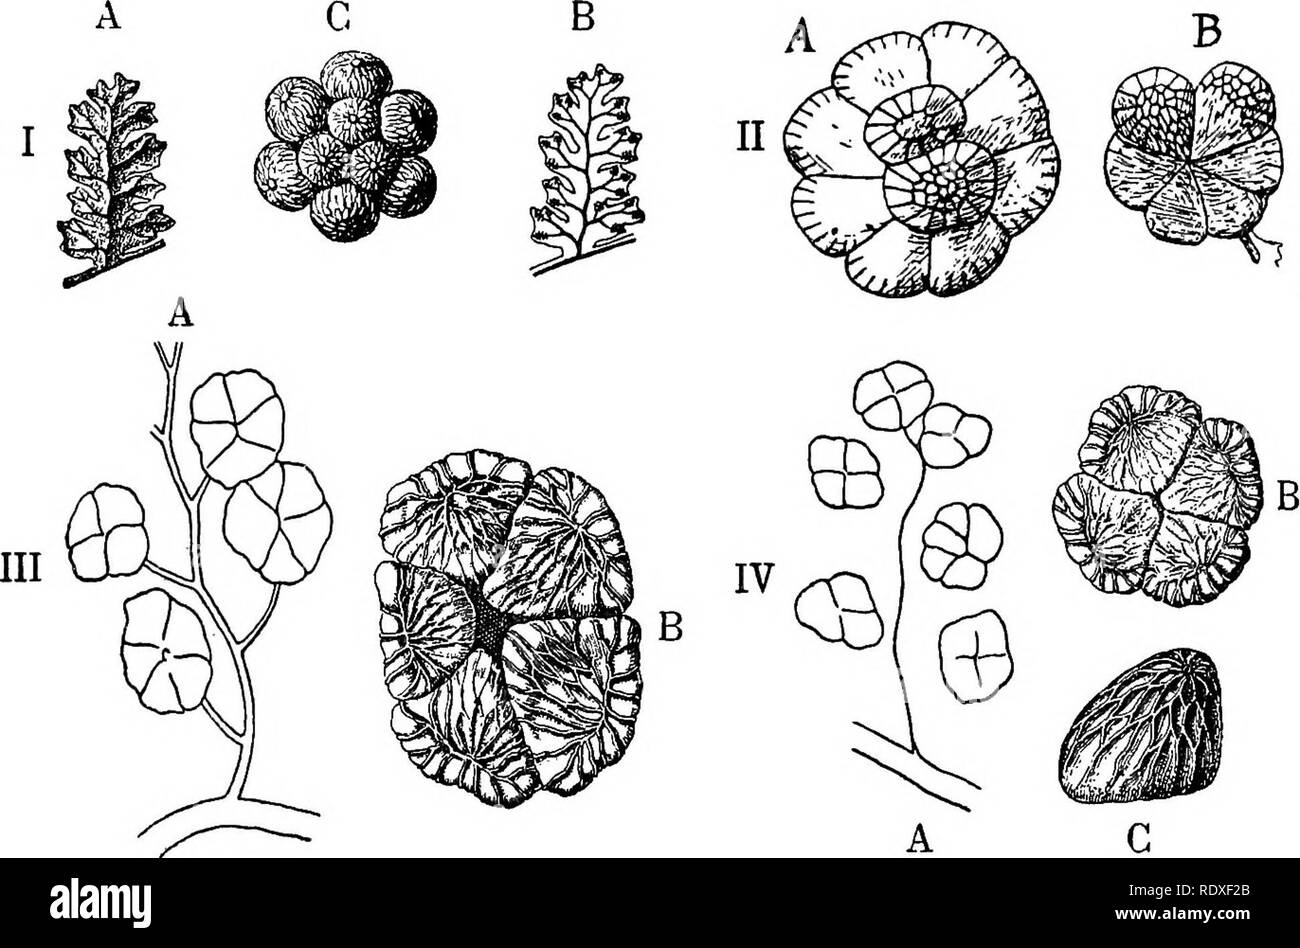 . The origin of a land flora, a theory based upon the facts of alternation. Plant morphology. S6o FILICALES primitive. It will be seen that this species has a stelar structure of the axis of a type which also indicates its relatively primitive character in the genus. The sorus of Oligocarpia from the upper Carboniferous corresponds in its arrangement to that of Gkichenia (Fig. 312). O. Gutbieri and lindsaeoides show uniseriate sori with varying number of the sporangia, as in G. flabellata; but 0. Brongniartii has accessory sporangia occupying. Fig. 312. I. Oligocarpia Brongniartii,$&gt;tiir. ^ Stock Photo